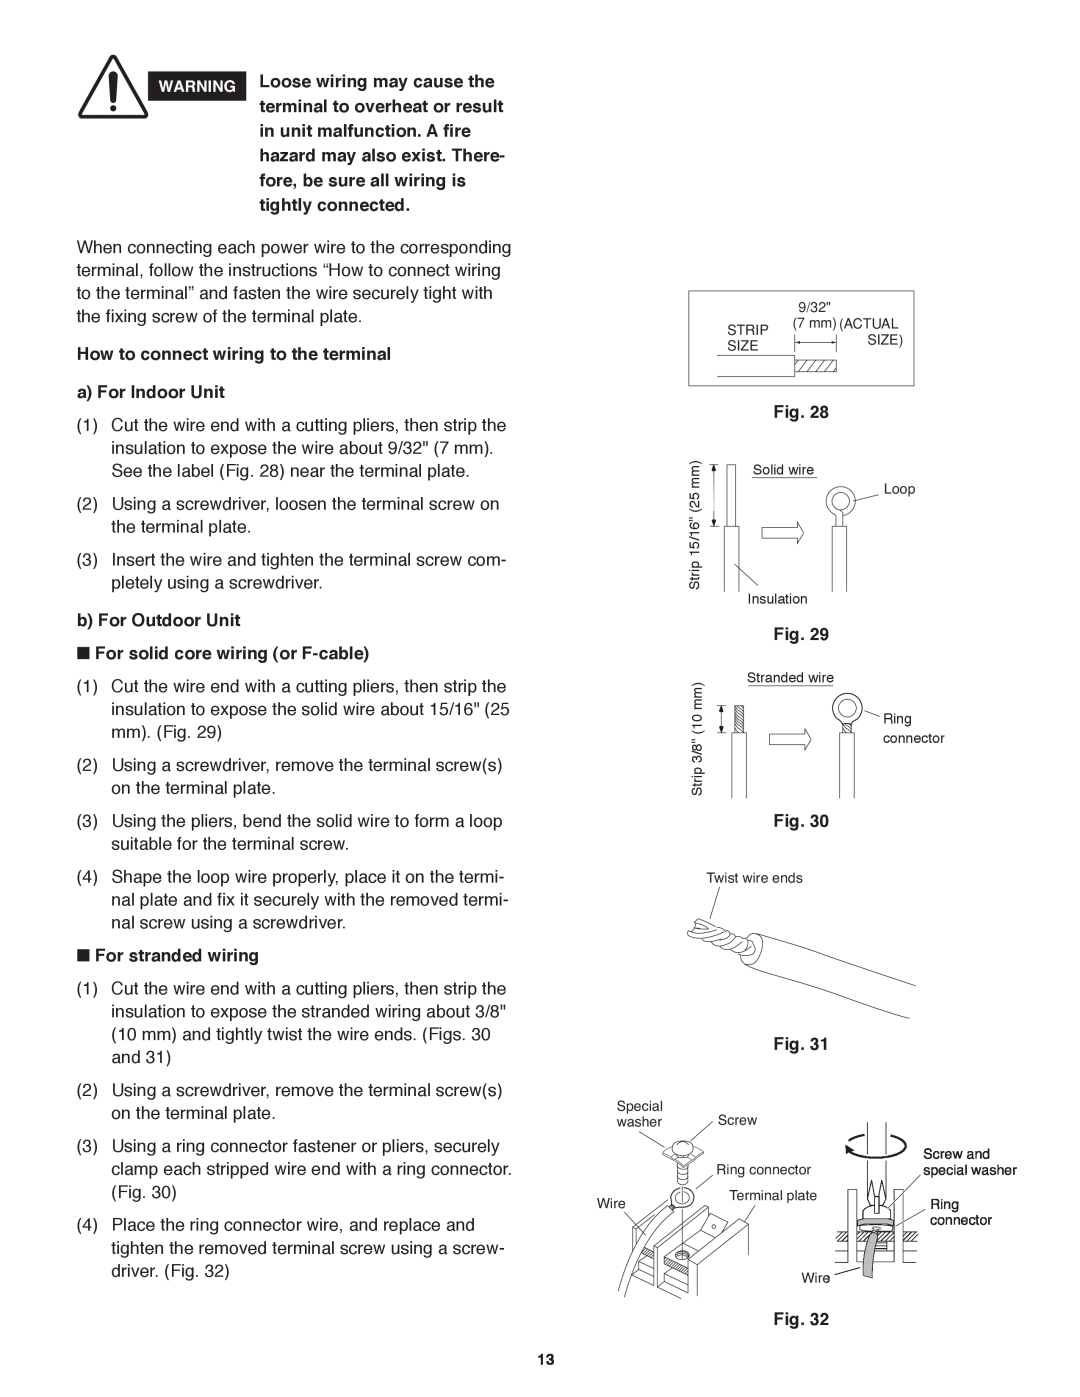 Panasonic R410A How to connect wiring to the terminal, a For Indoor Unit, b For Outdoor Unit, For stranded wiring, Fig 